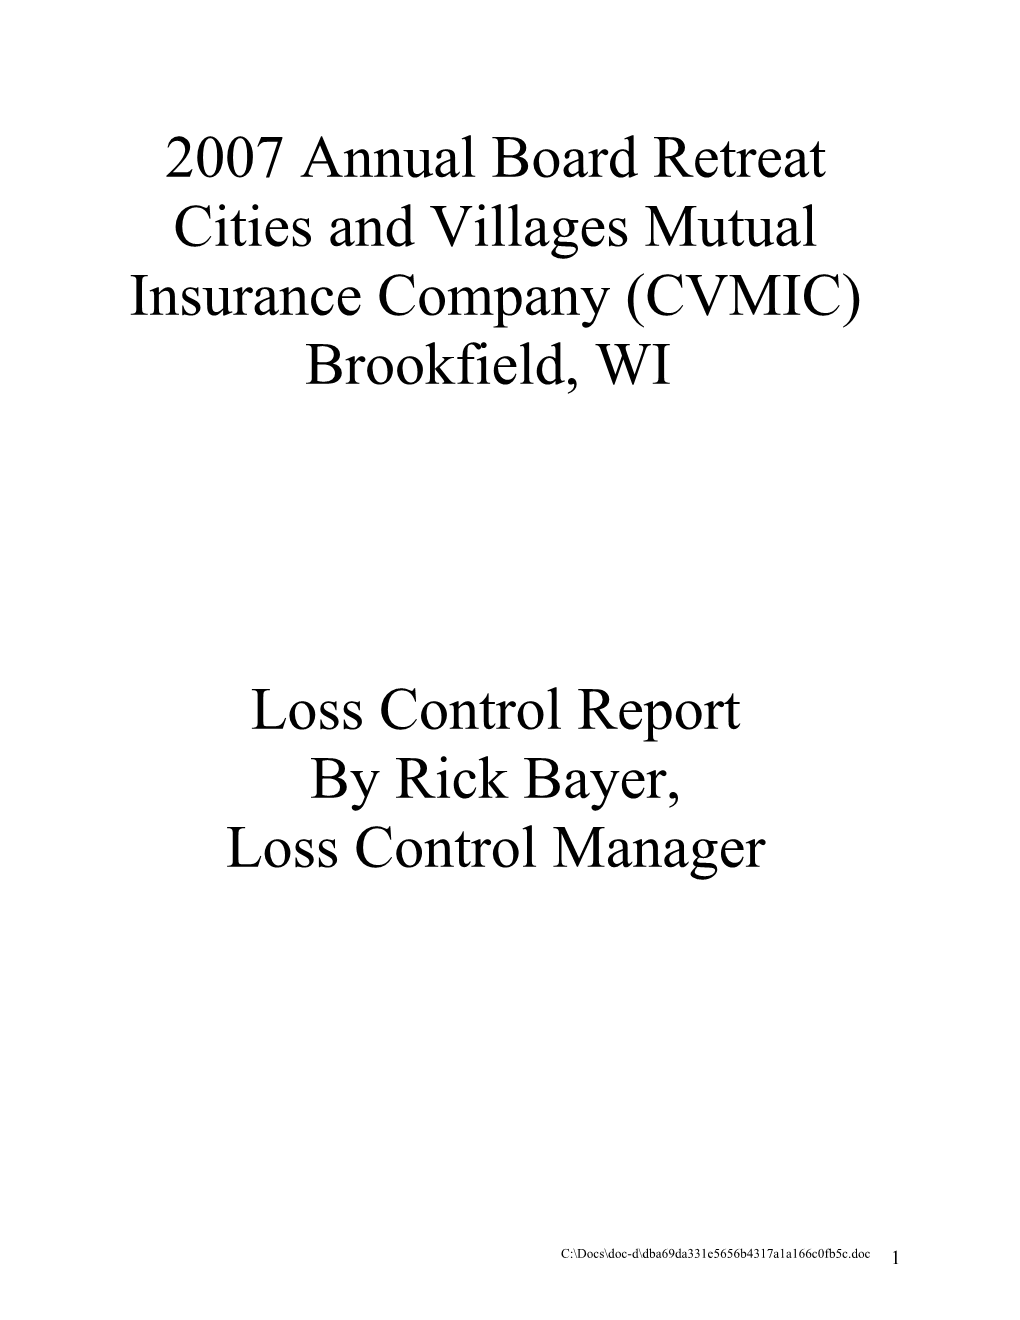 Cities and Villages Mutual Insurance Company (CVMIC)